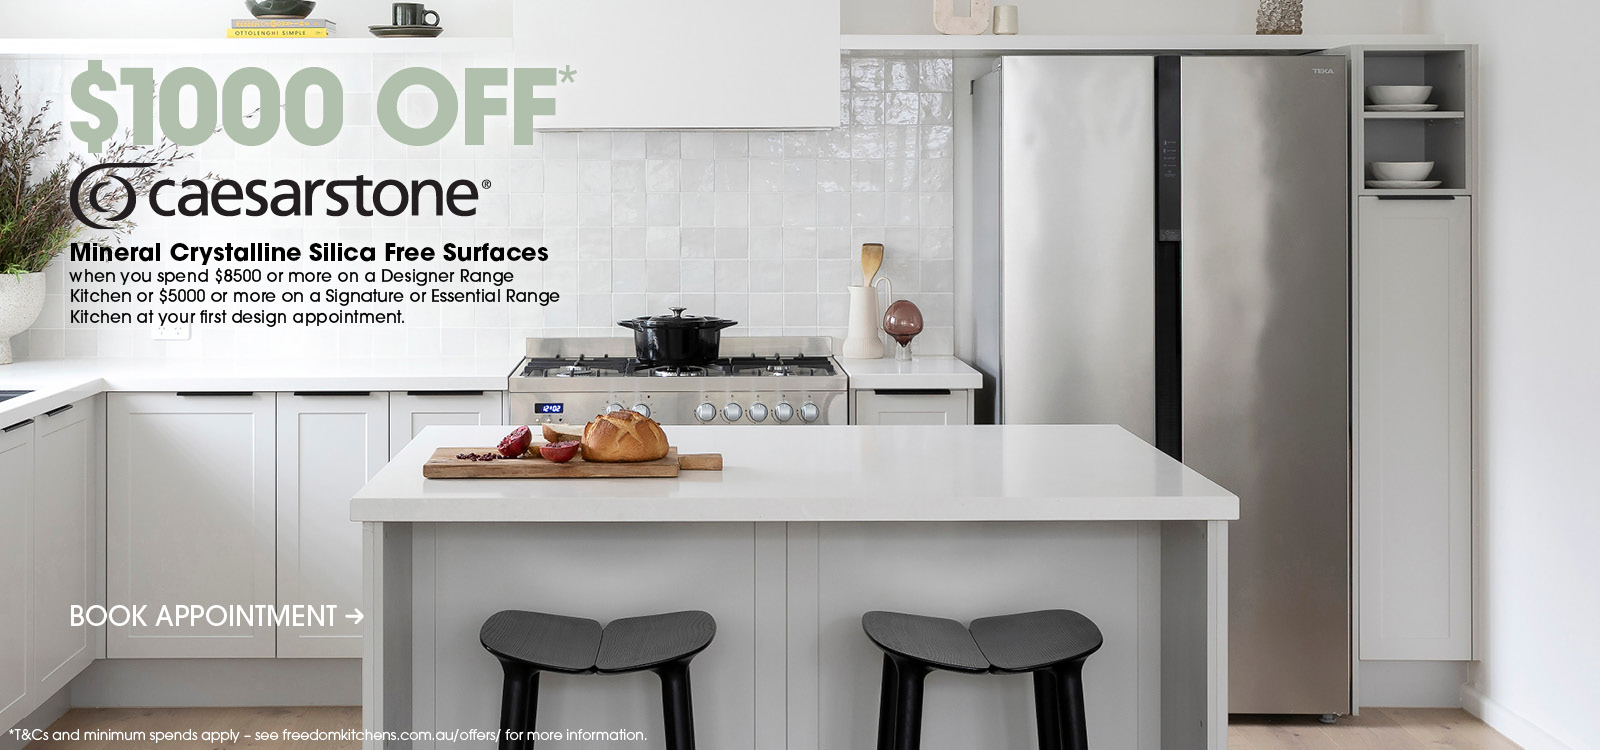 Freedom Kitchens - $1000 Off Caesarstone Mineral Surfaces